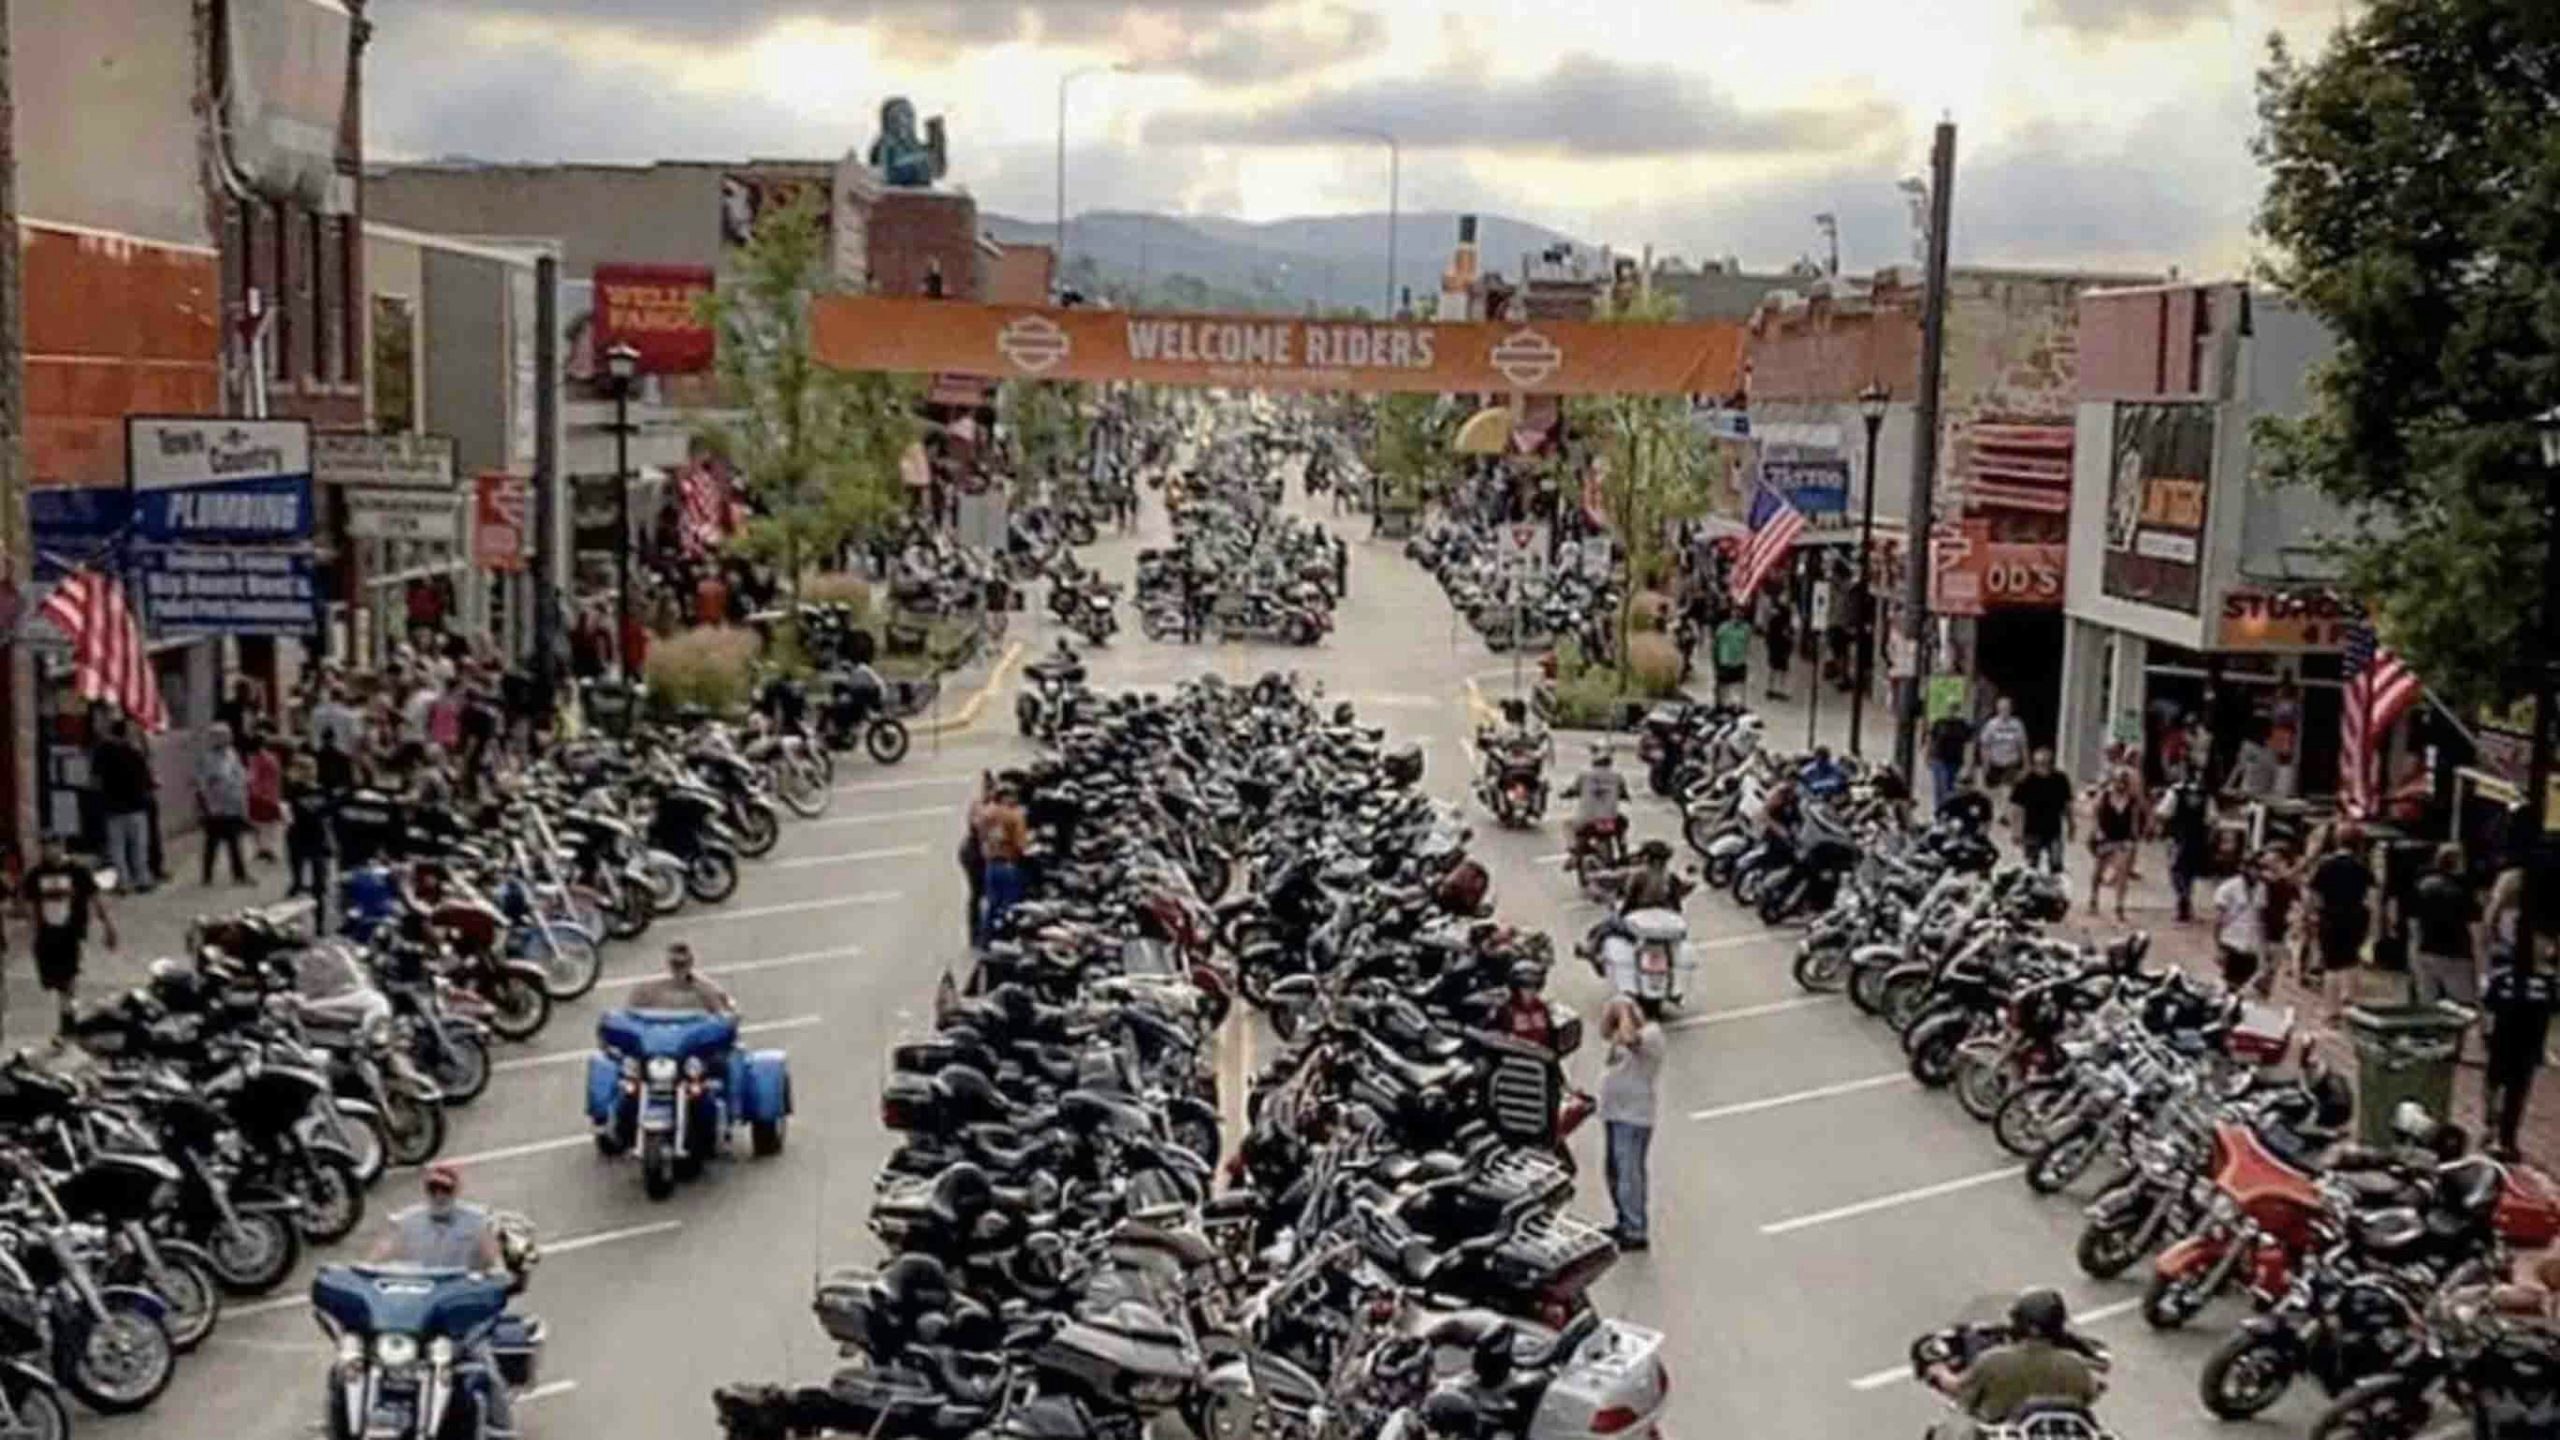 Annual Sturgis Motorcycle Rally Will Happen (With Some Changes) Your